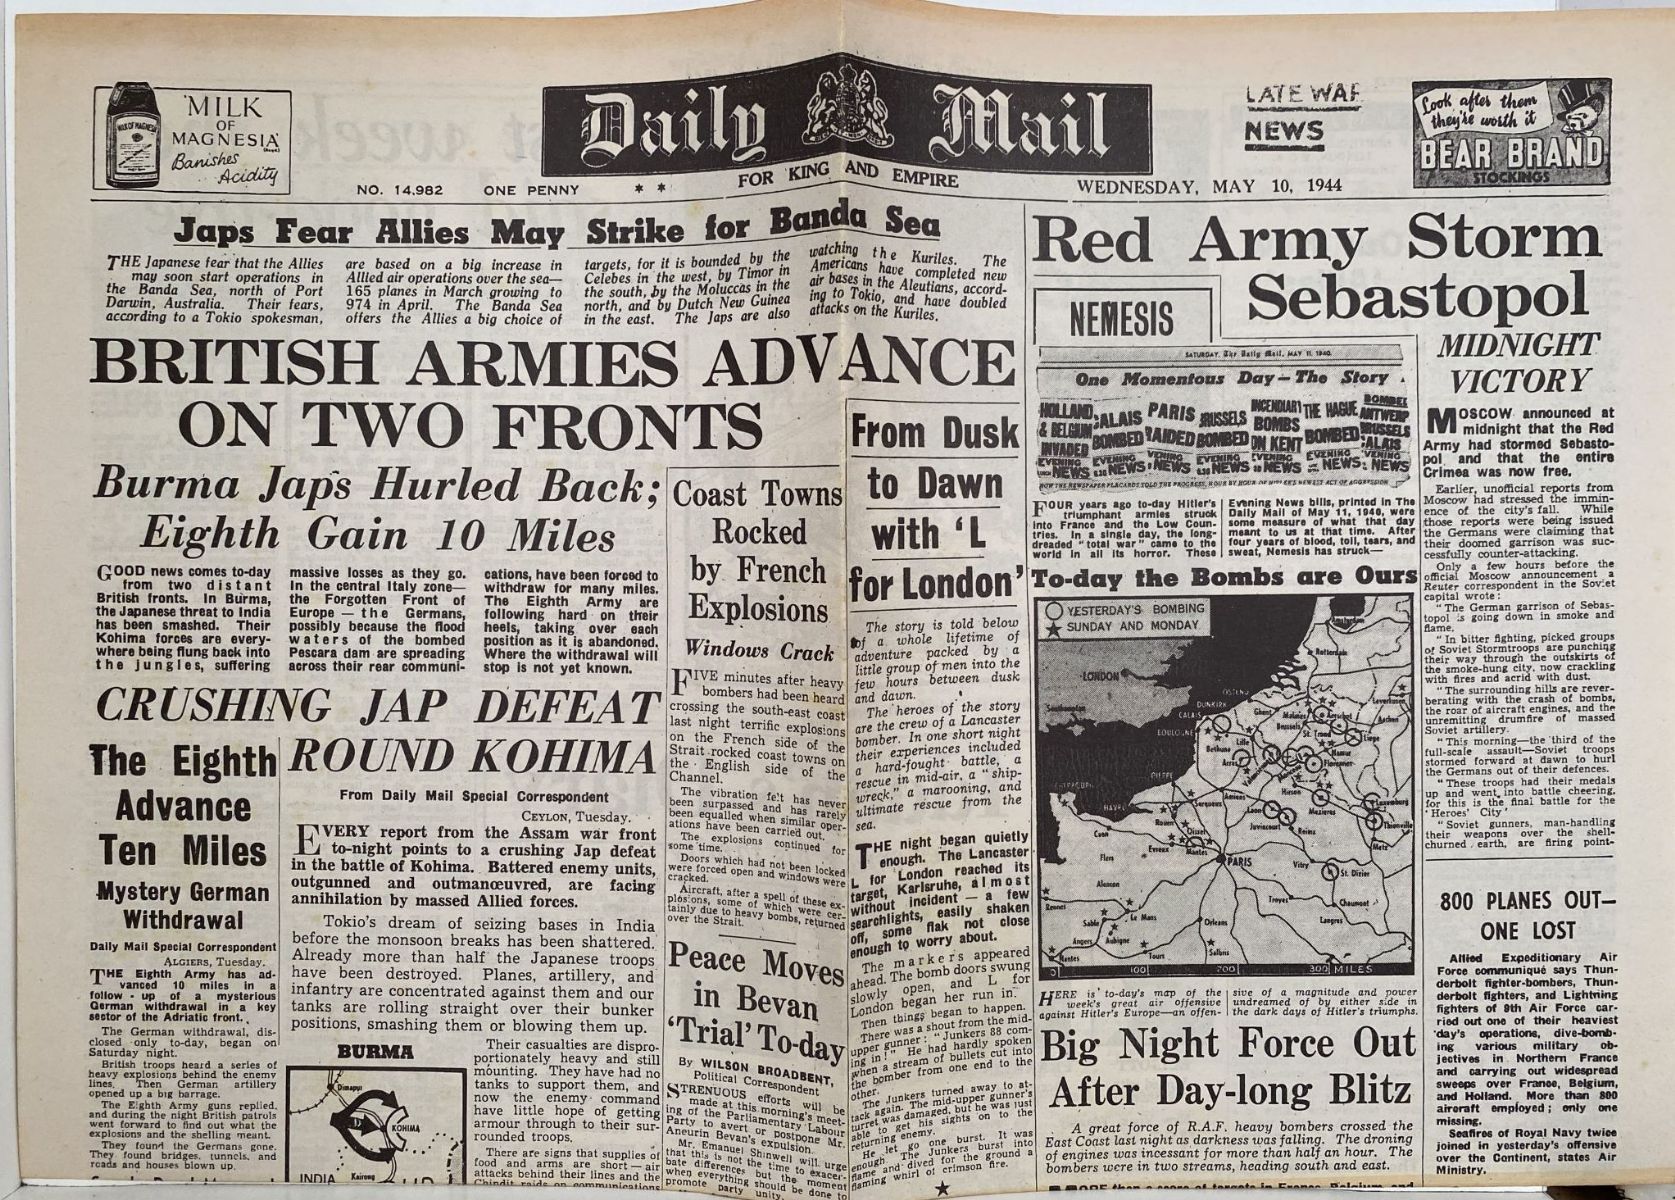 OLD WARTIME NEWSPAPER: Daily Mail, Wednesday 10th May 1944